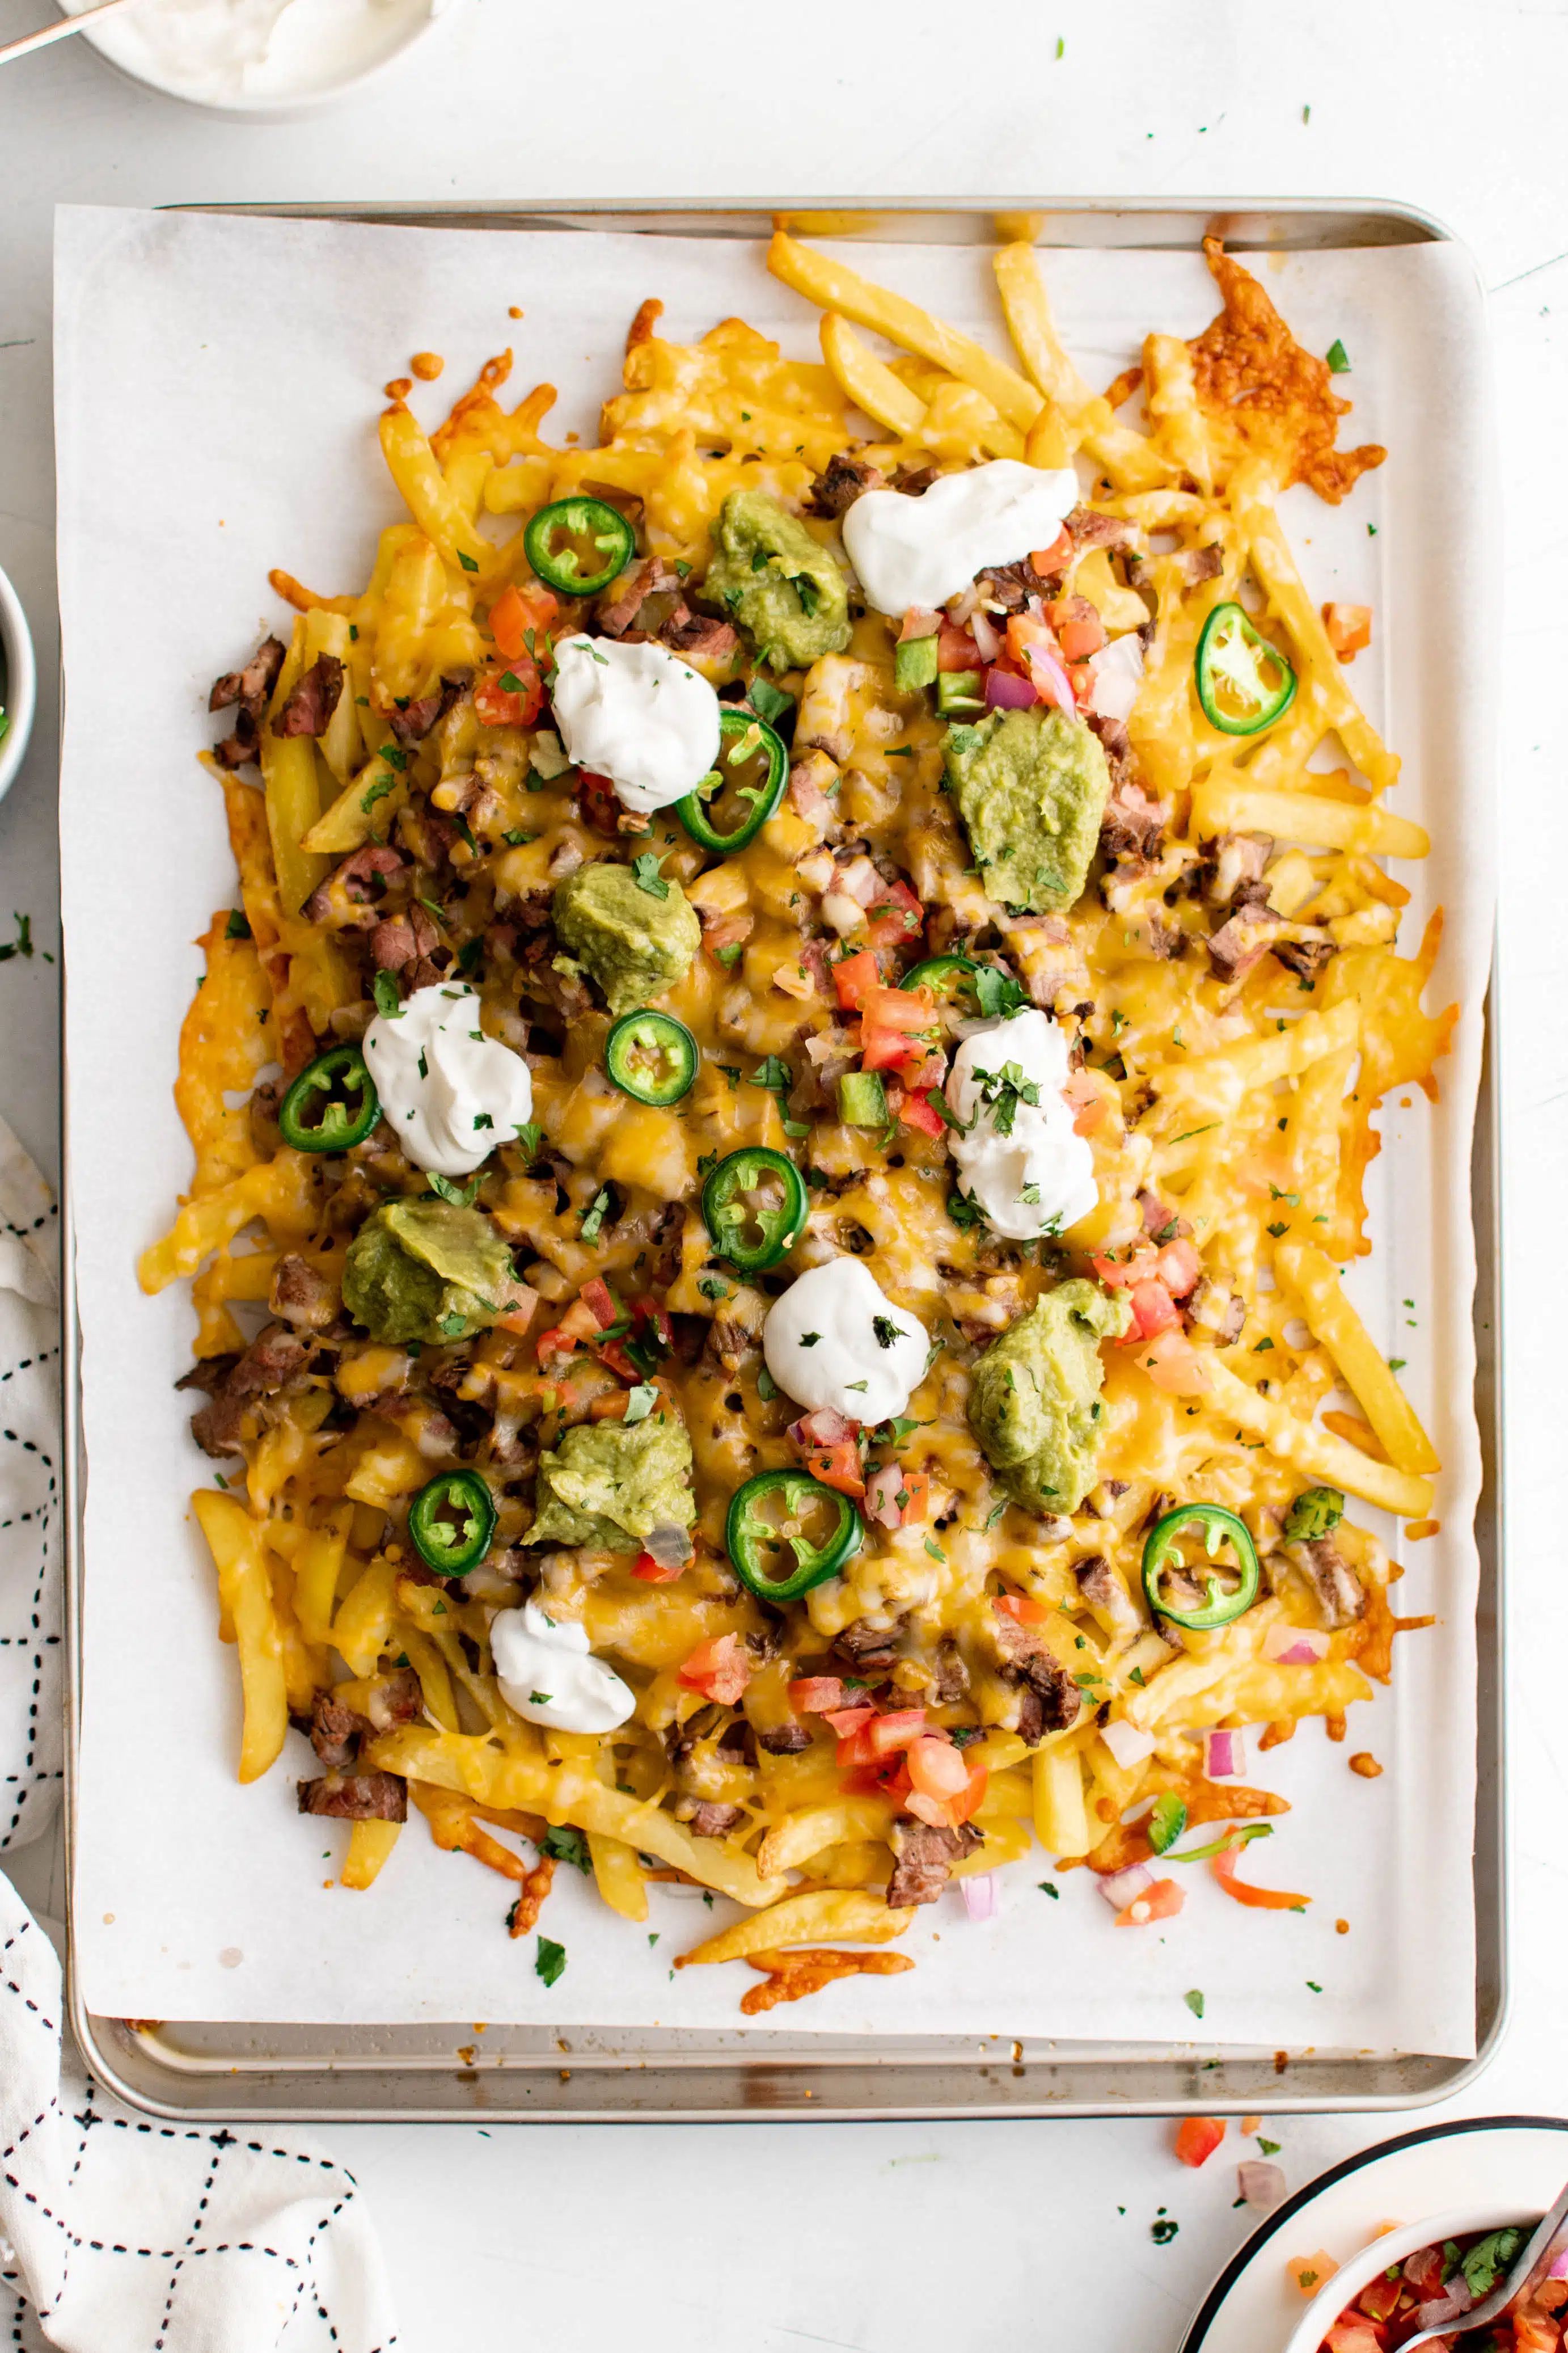 Large baking sheet line with parchment paper and filled with french fries smothered with carne asada, cheese, jalapeno, pico de gallo, sour cream, and guacamole.